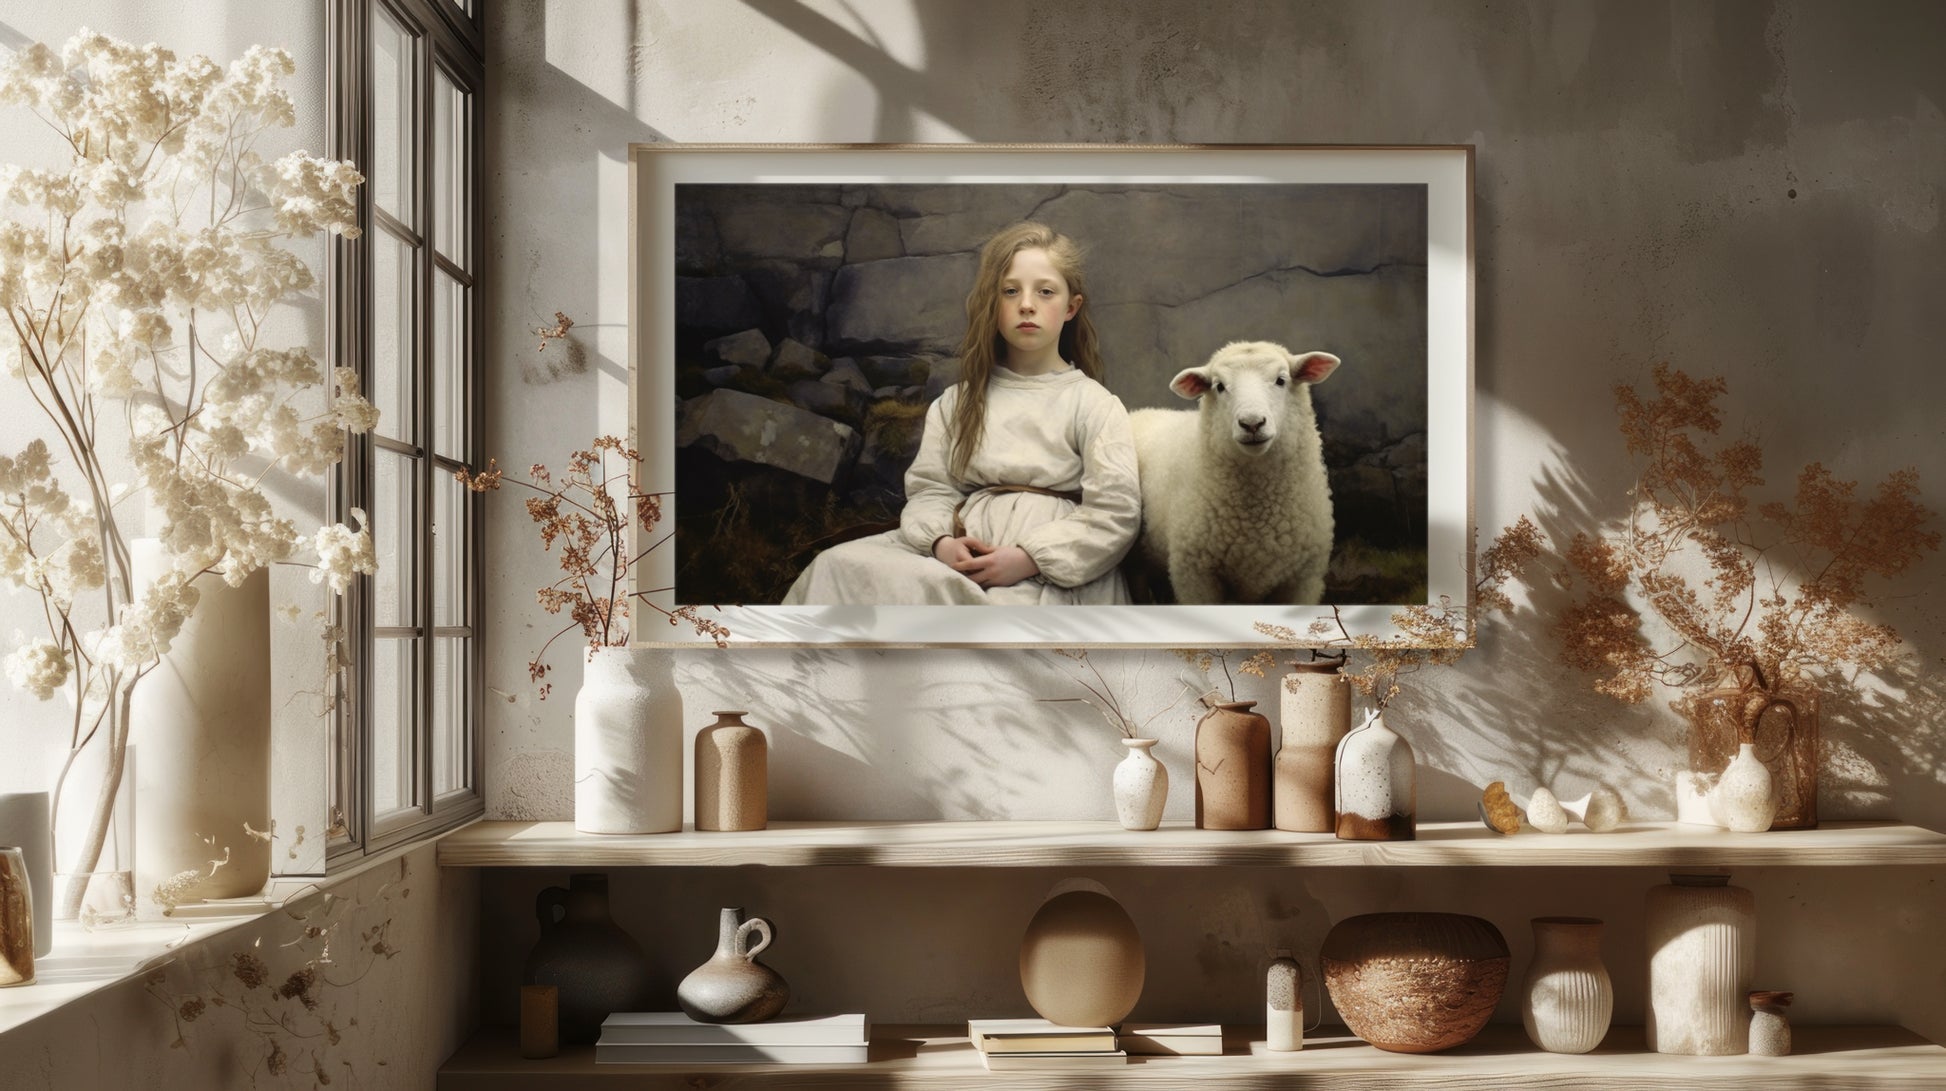 Artwork print featuring a girl and a sheep sitting together with a rocky background in the Down East Maine collection.